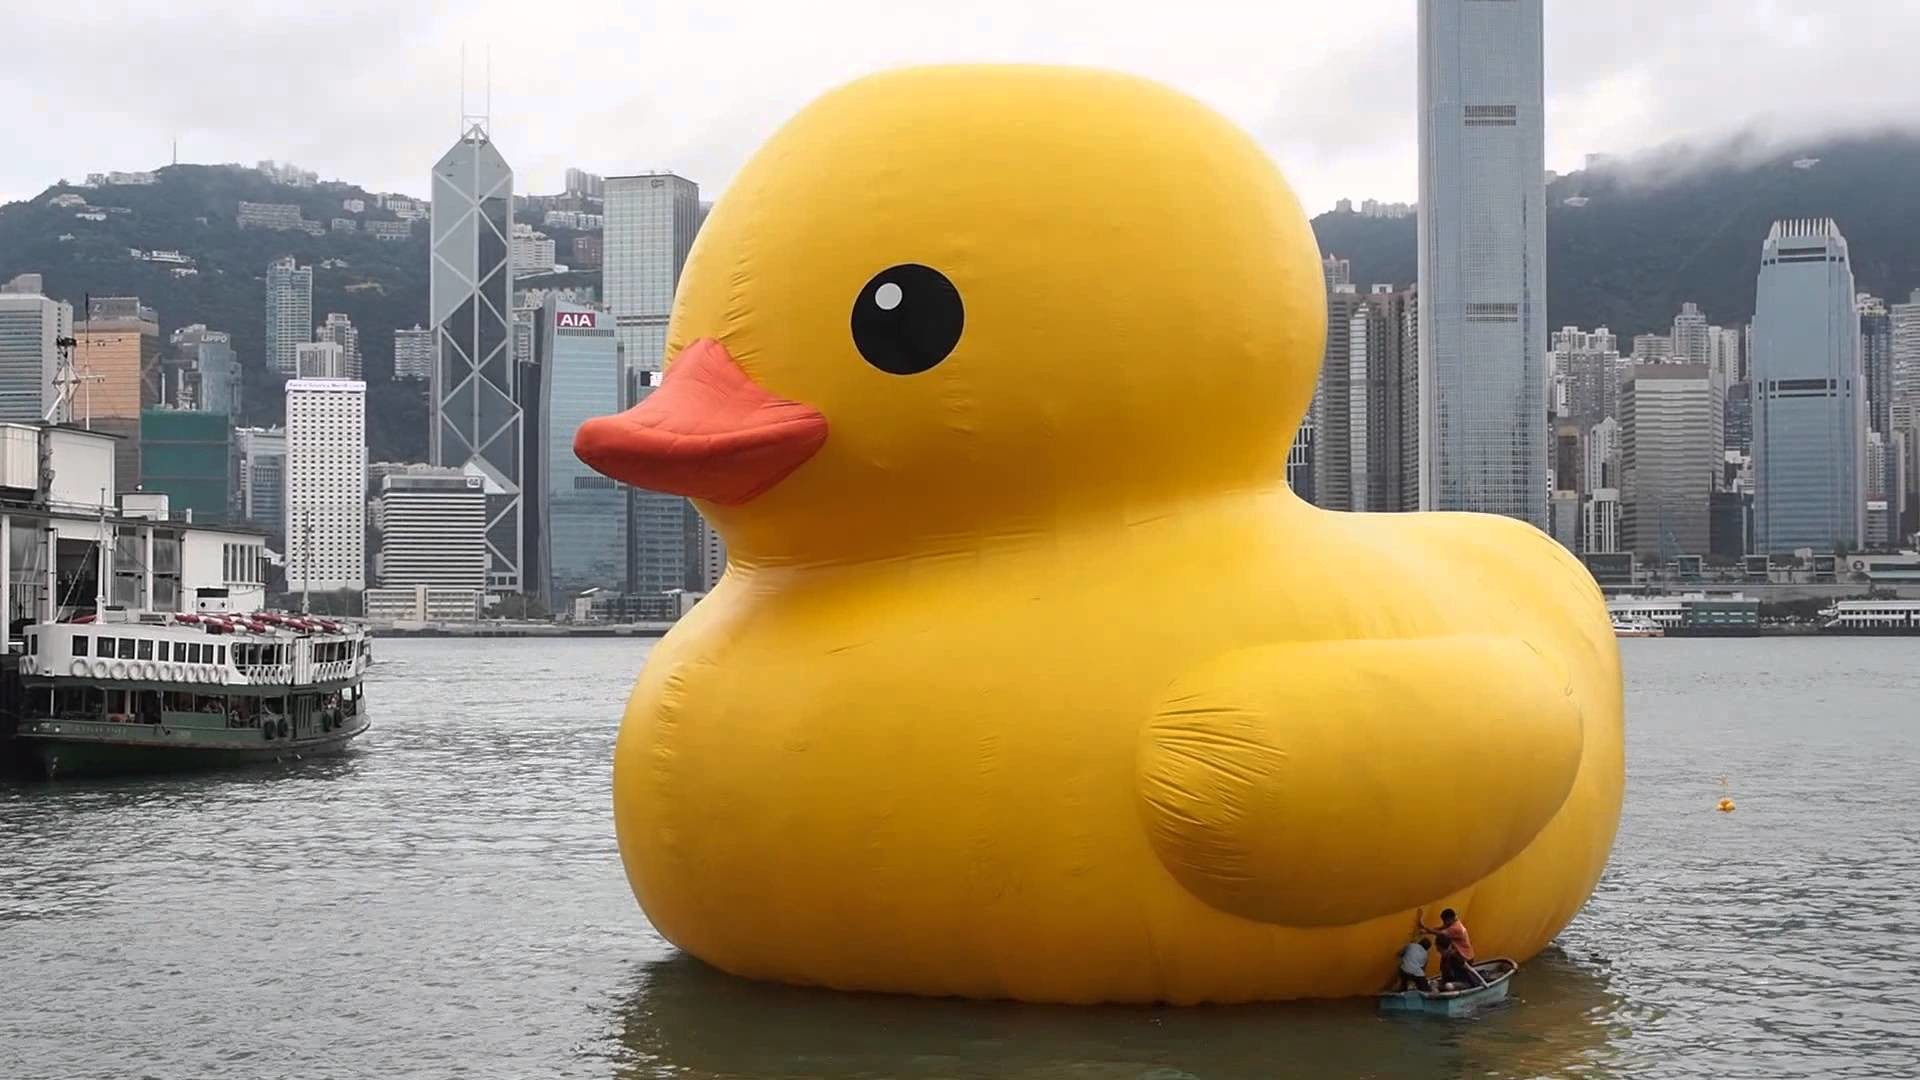 1920x1080 What can be found inside the rubber duck?